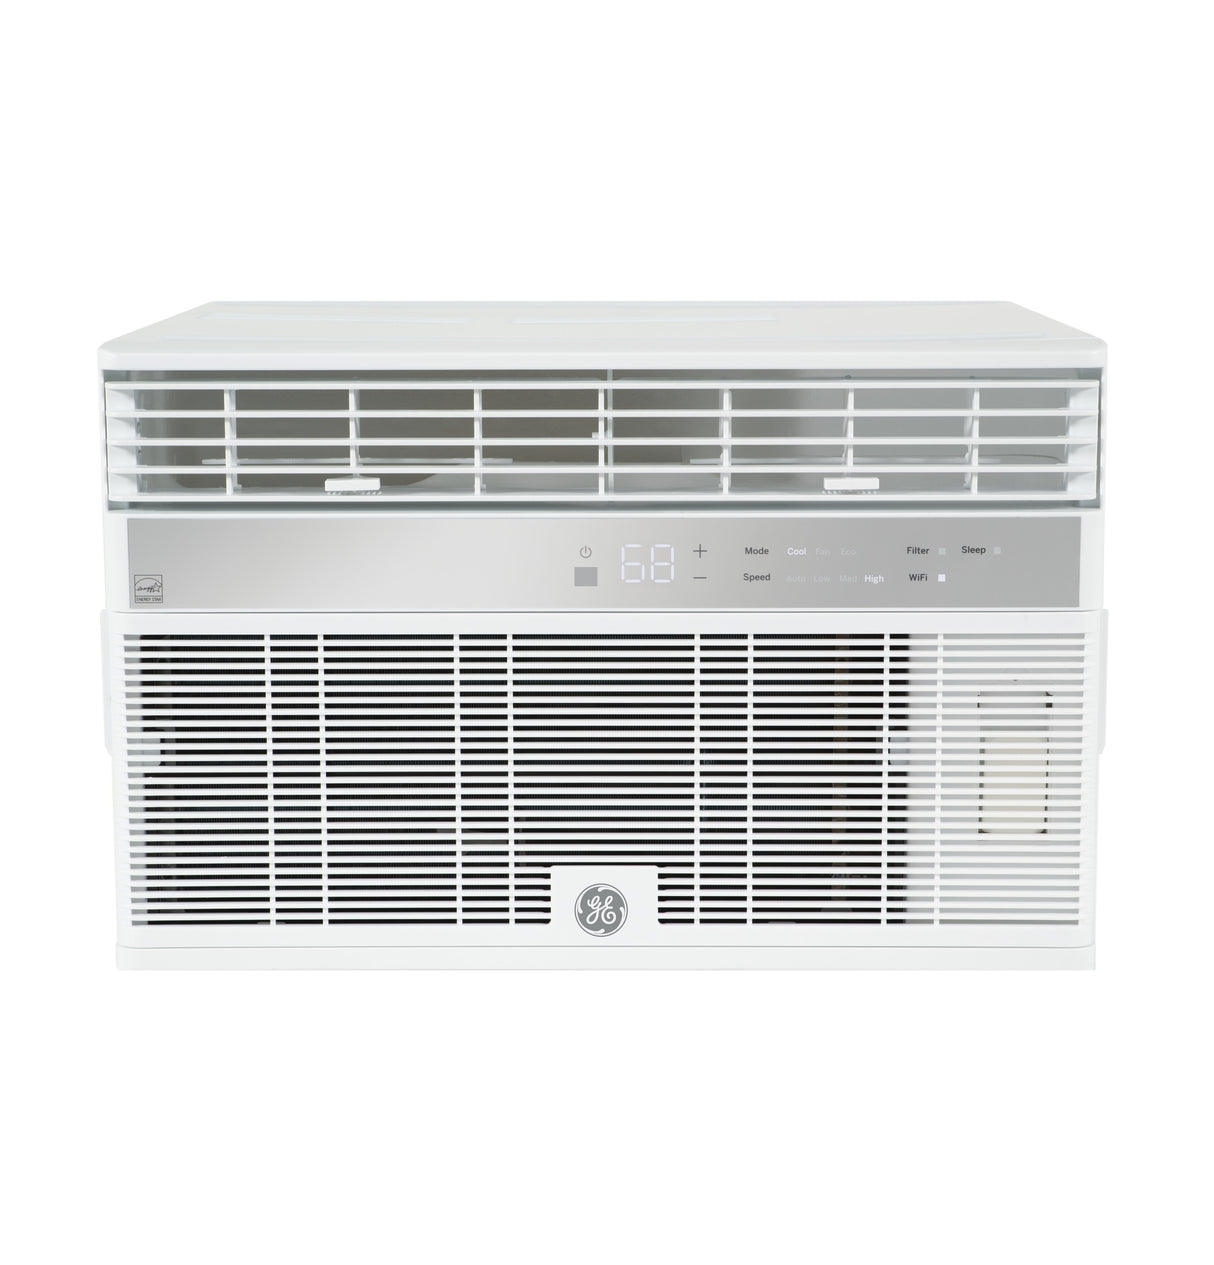 GE(R) ENERGY STAR(R) 8,000 BTU Smart Electronic Window Air Conditioner for Medium Rooms up to 350 sq. ft. - (AHY08LZ)